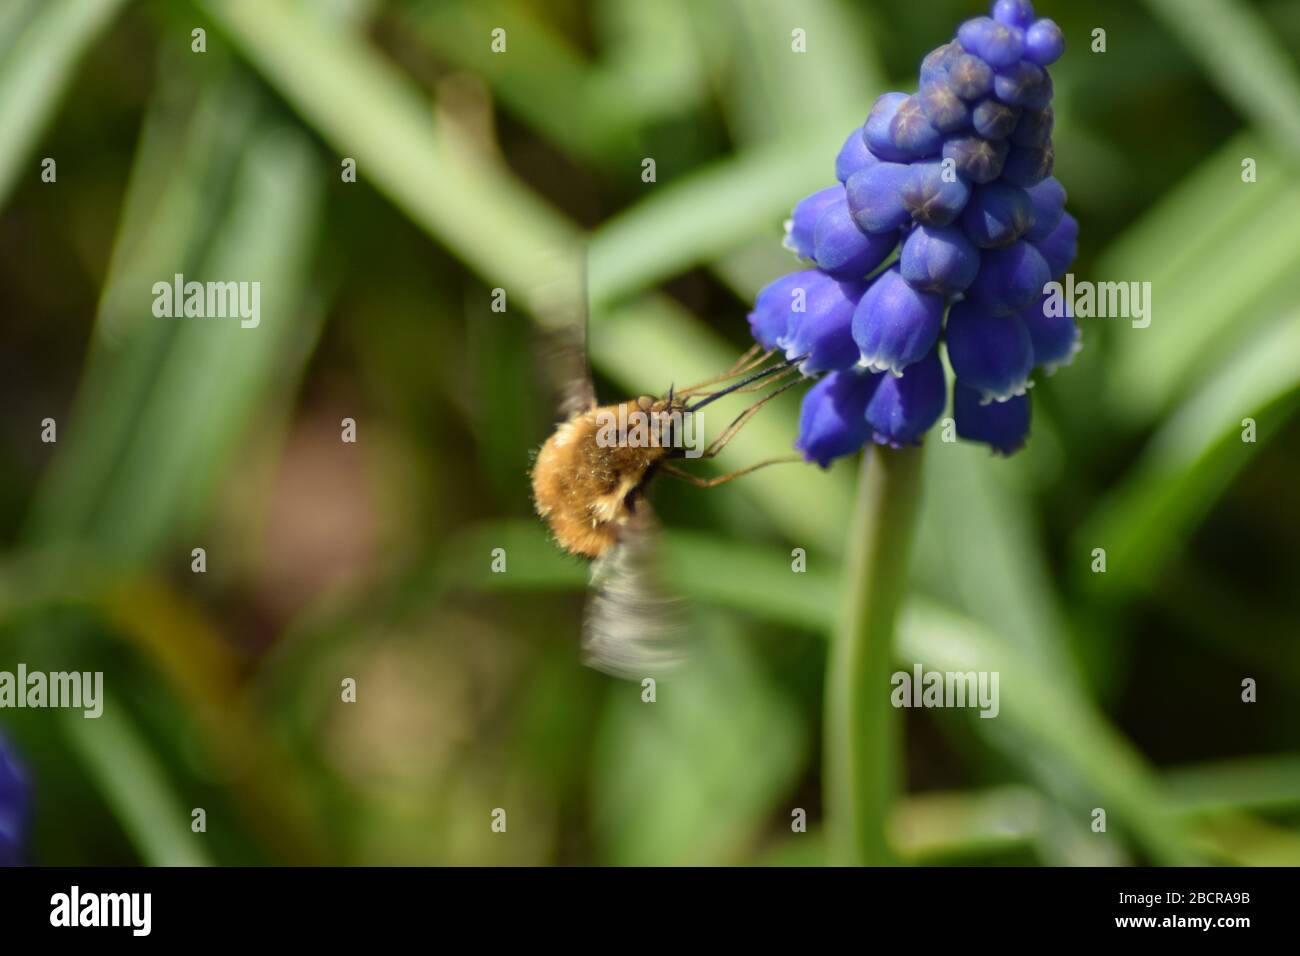 large dark edged bee-fly, northern hemisphere bumble bee variety known for early spring pollination Stock Photo